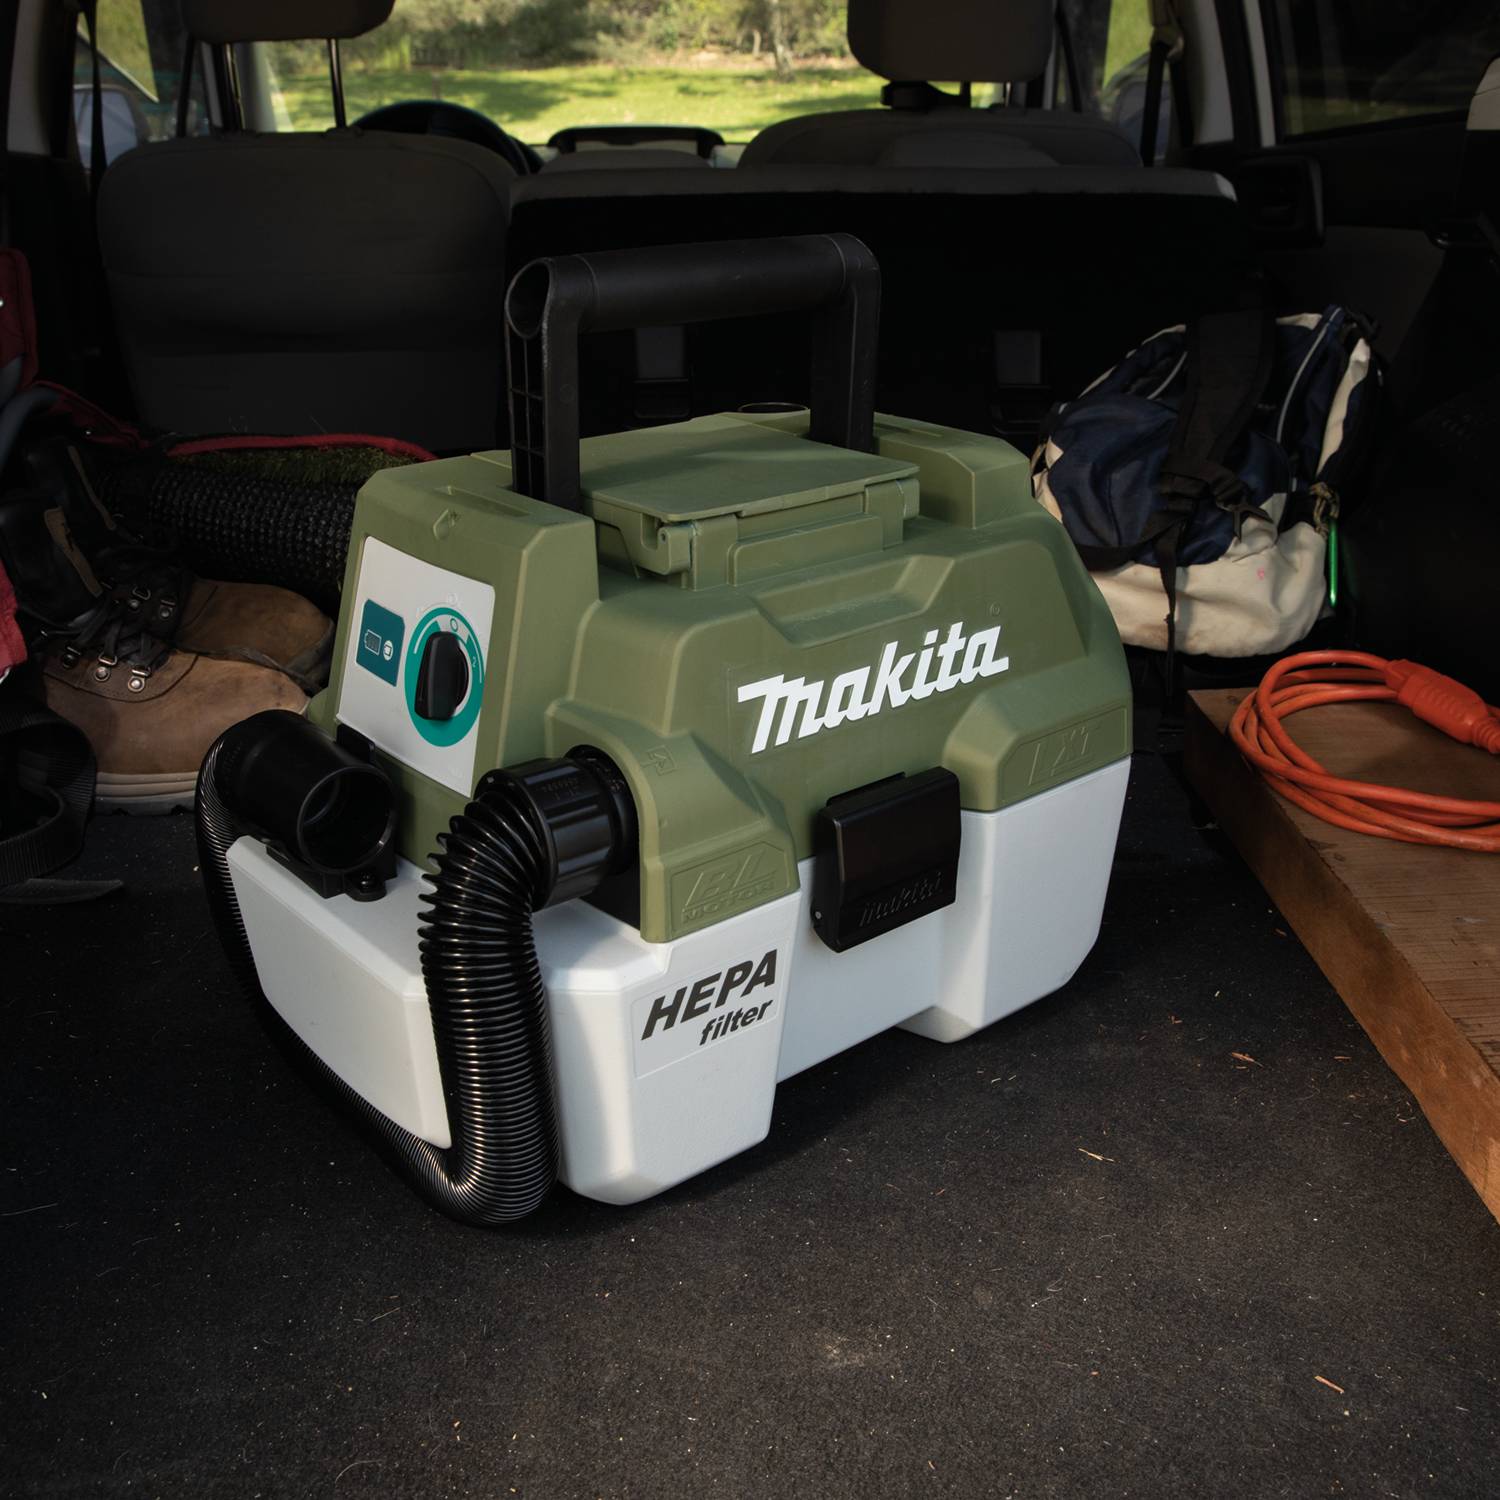 Makita ADCV11Z Outdoor Adventure 18V LXT Lithium-Ion Brushless Cordless Wet/Dry Vacuum (Tool Only)